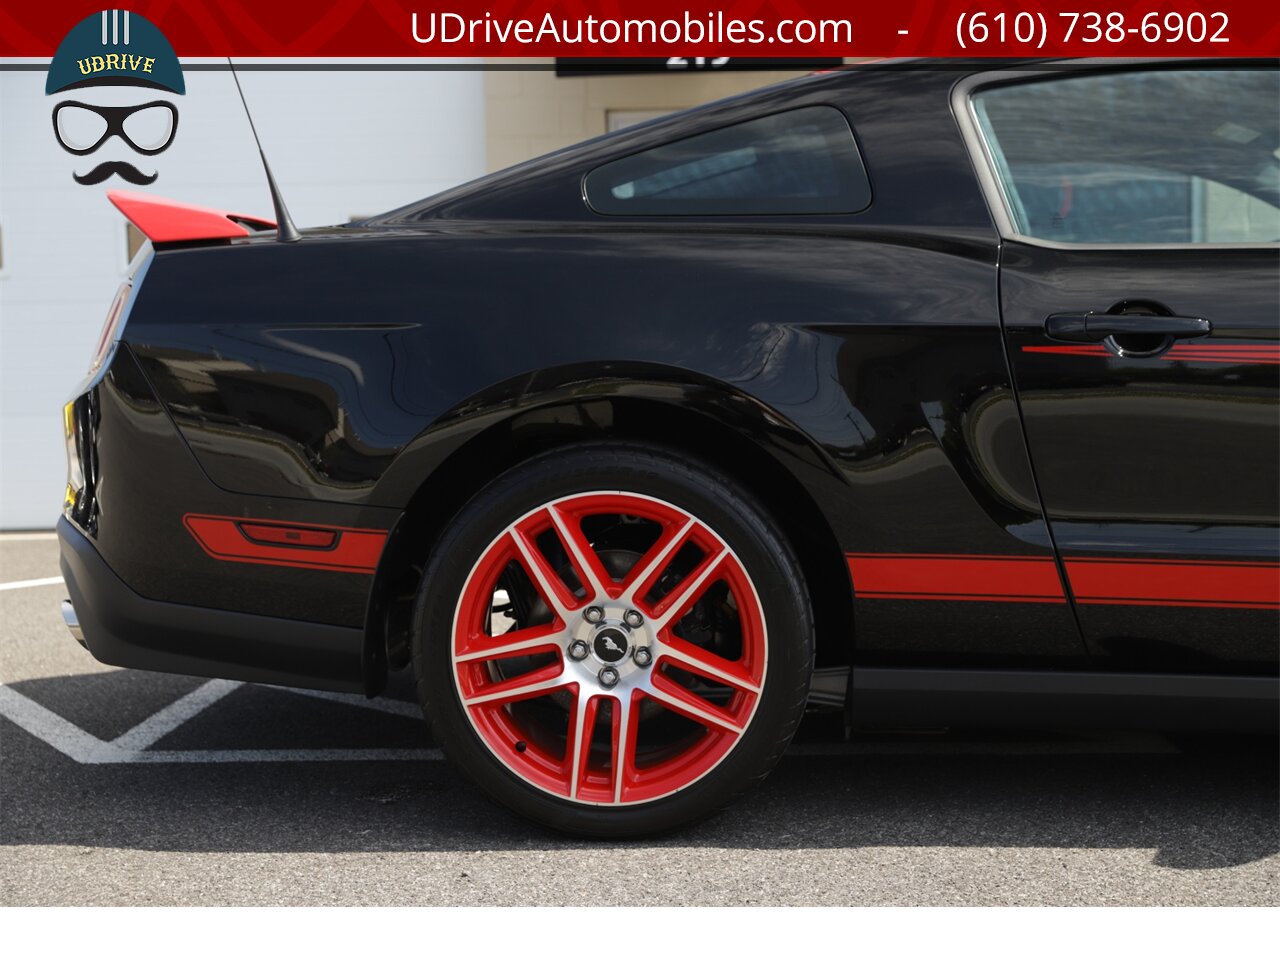 2012 Ford Mustang 866 Miles Boss 302 Laguna Seca #338 of 750  Red TracKey Activated - Photo 17 - West Chester, PA 19382